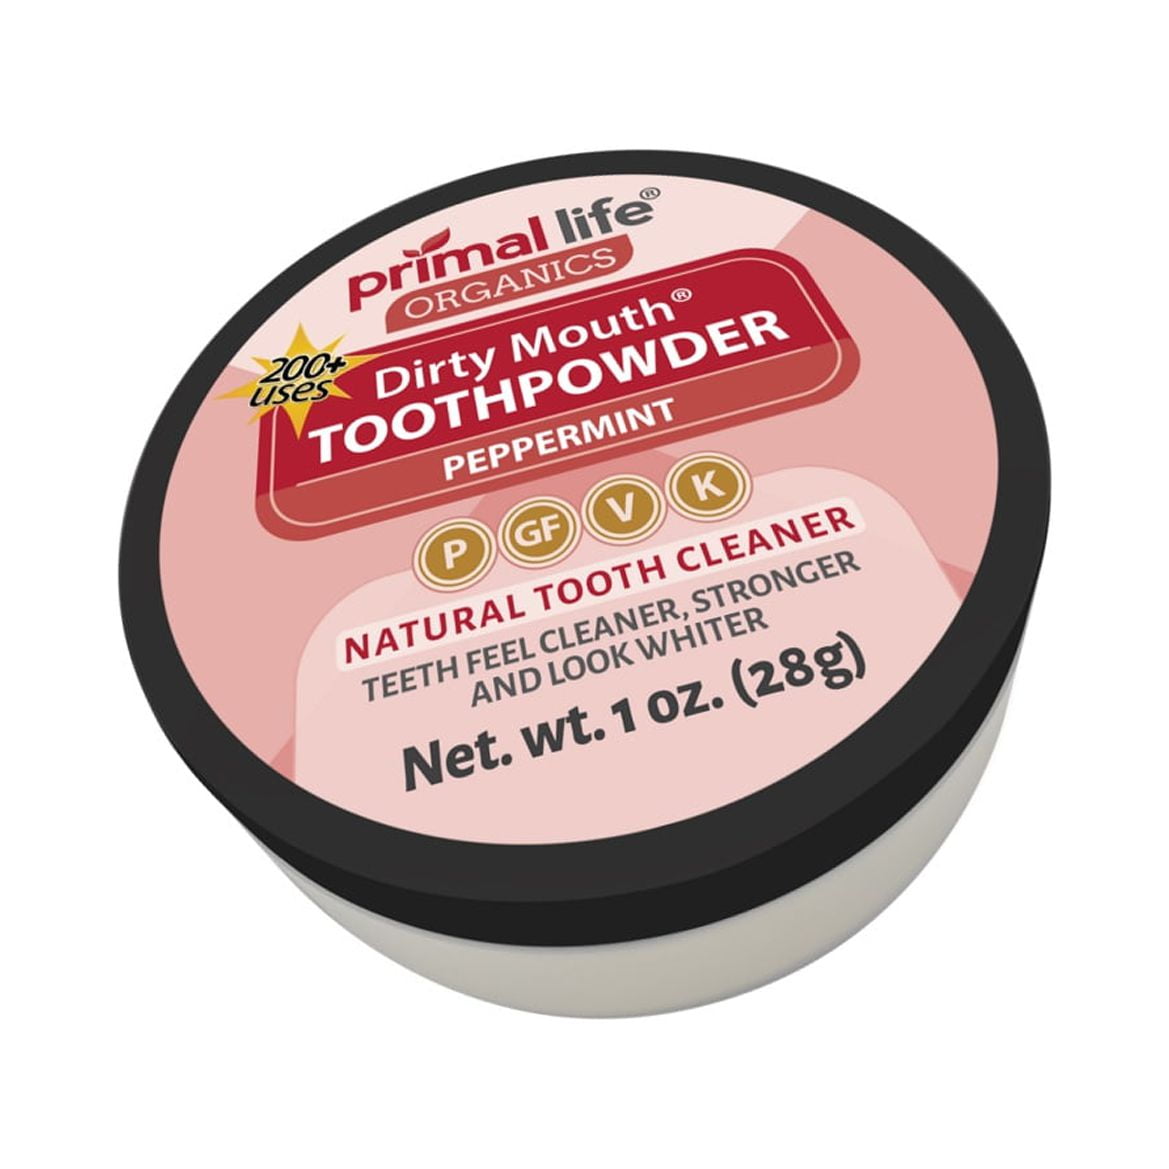 Primal Life Dirty Mouth Toothpowder Peppermint 1 Oz Cup